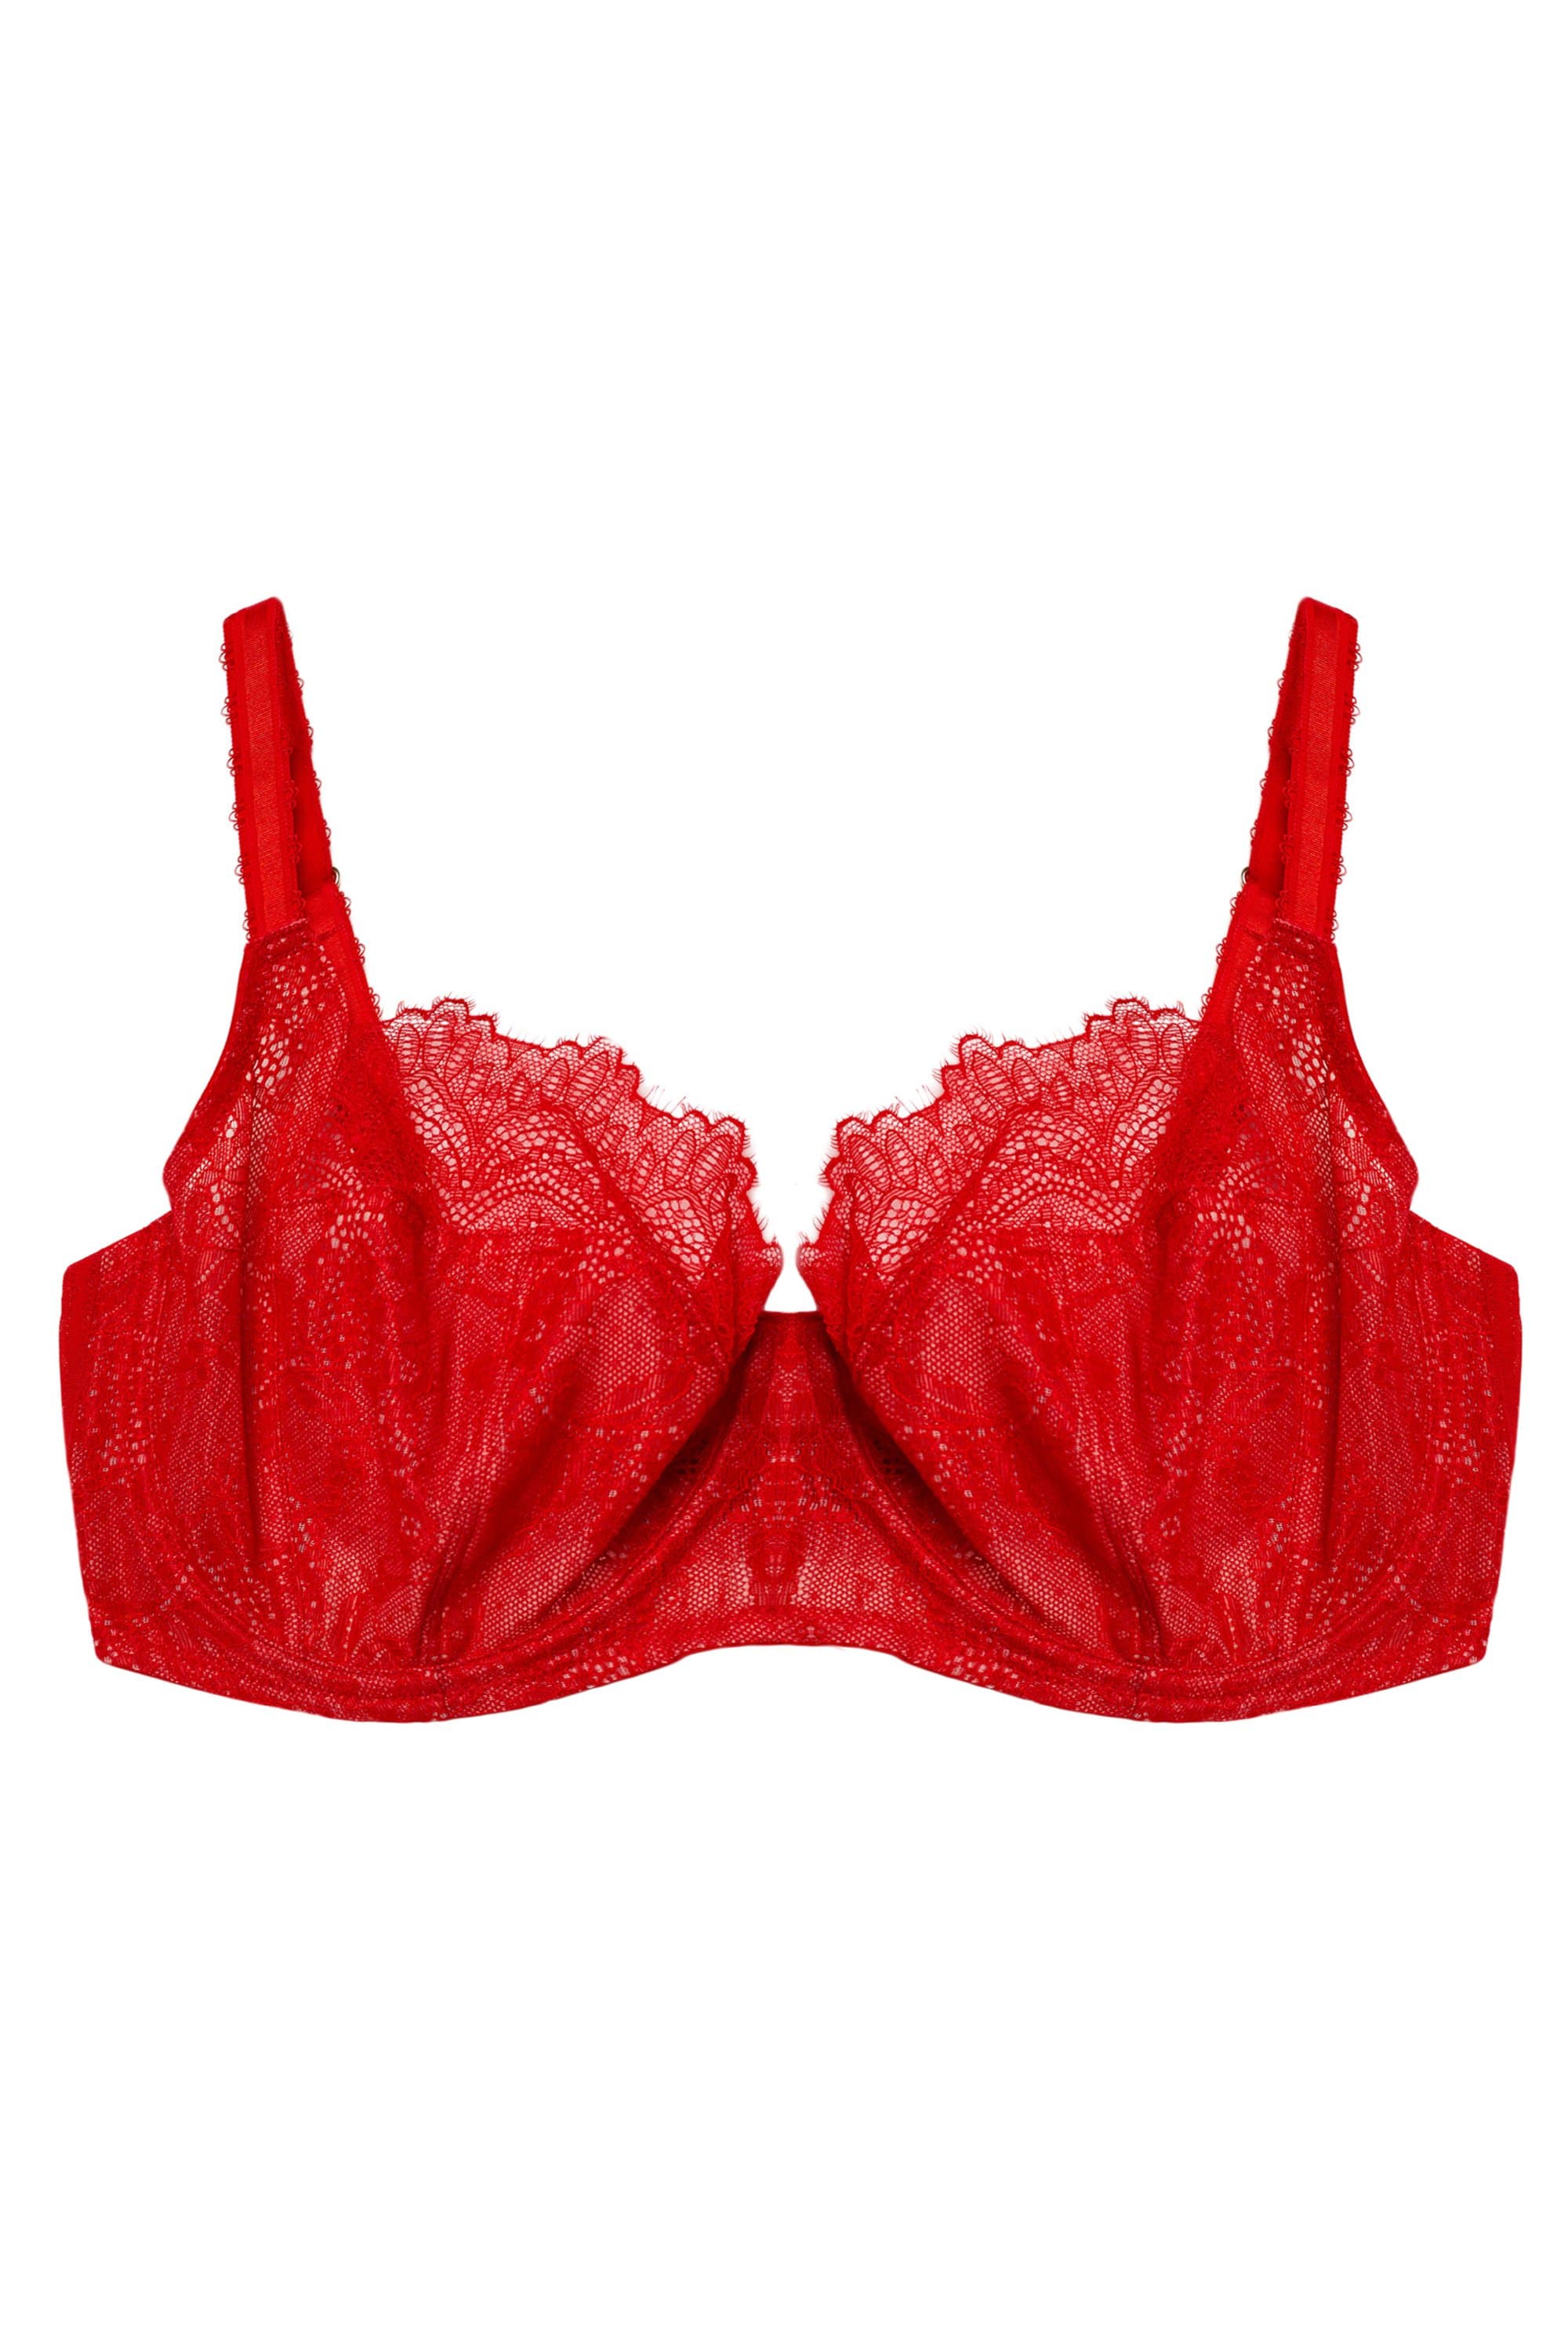 Red Cotton Jersey Non Padded Bra By Estonished, EST-MRBR-041